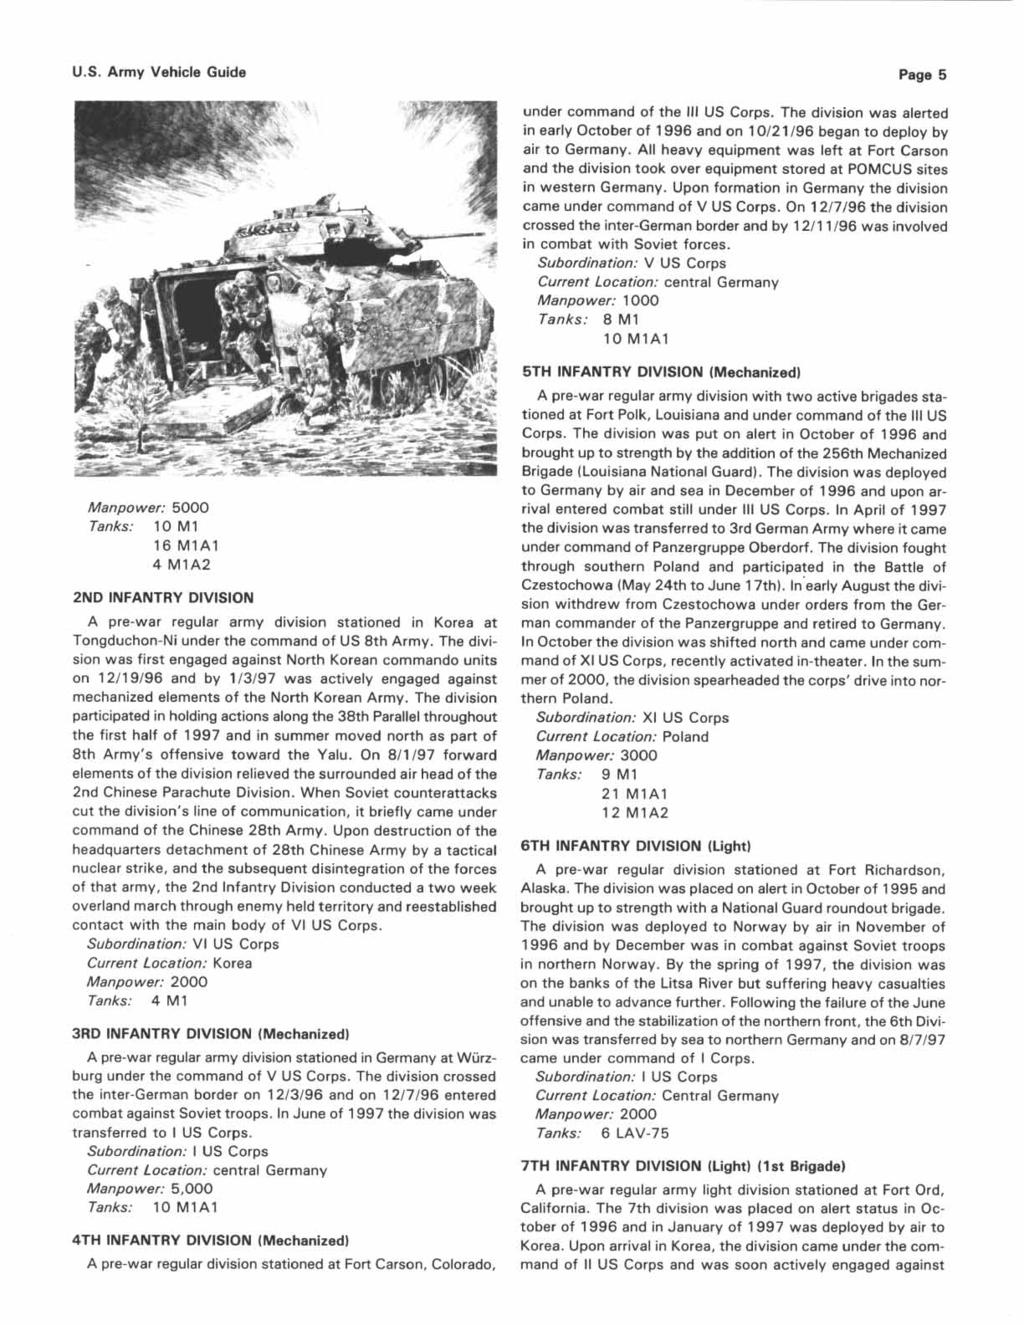 U.S. Army Vehicle Guide Page 5 Manpower: 5000 Tanks: 10 M1 16 MlAl 4 M1A2 2ND INFANTRY DIVISION A pre-war regular army division stationed in Korea at Tongduchon-Ni under the command of US 8th Army.